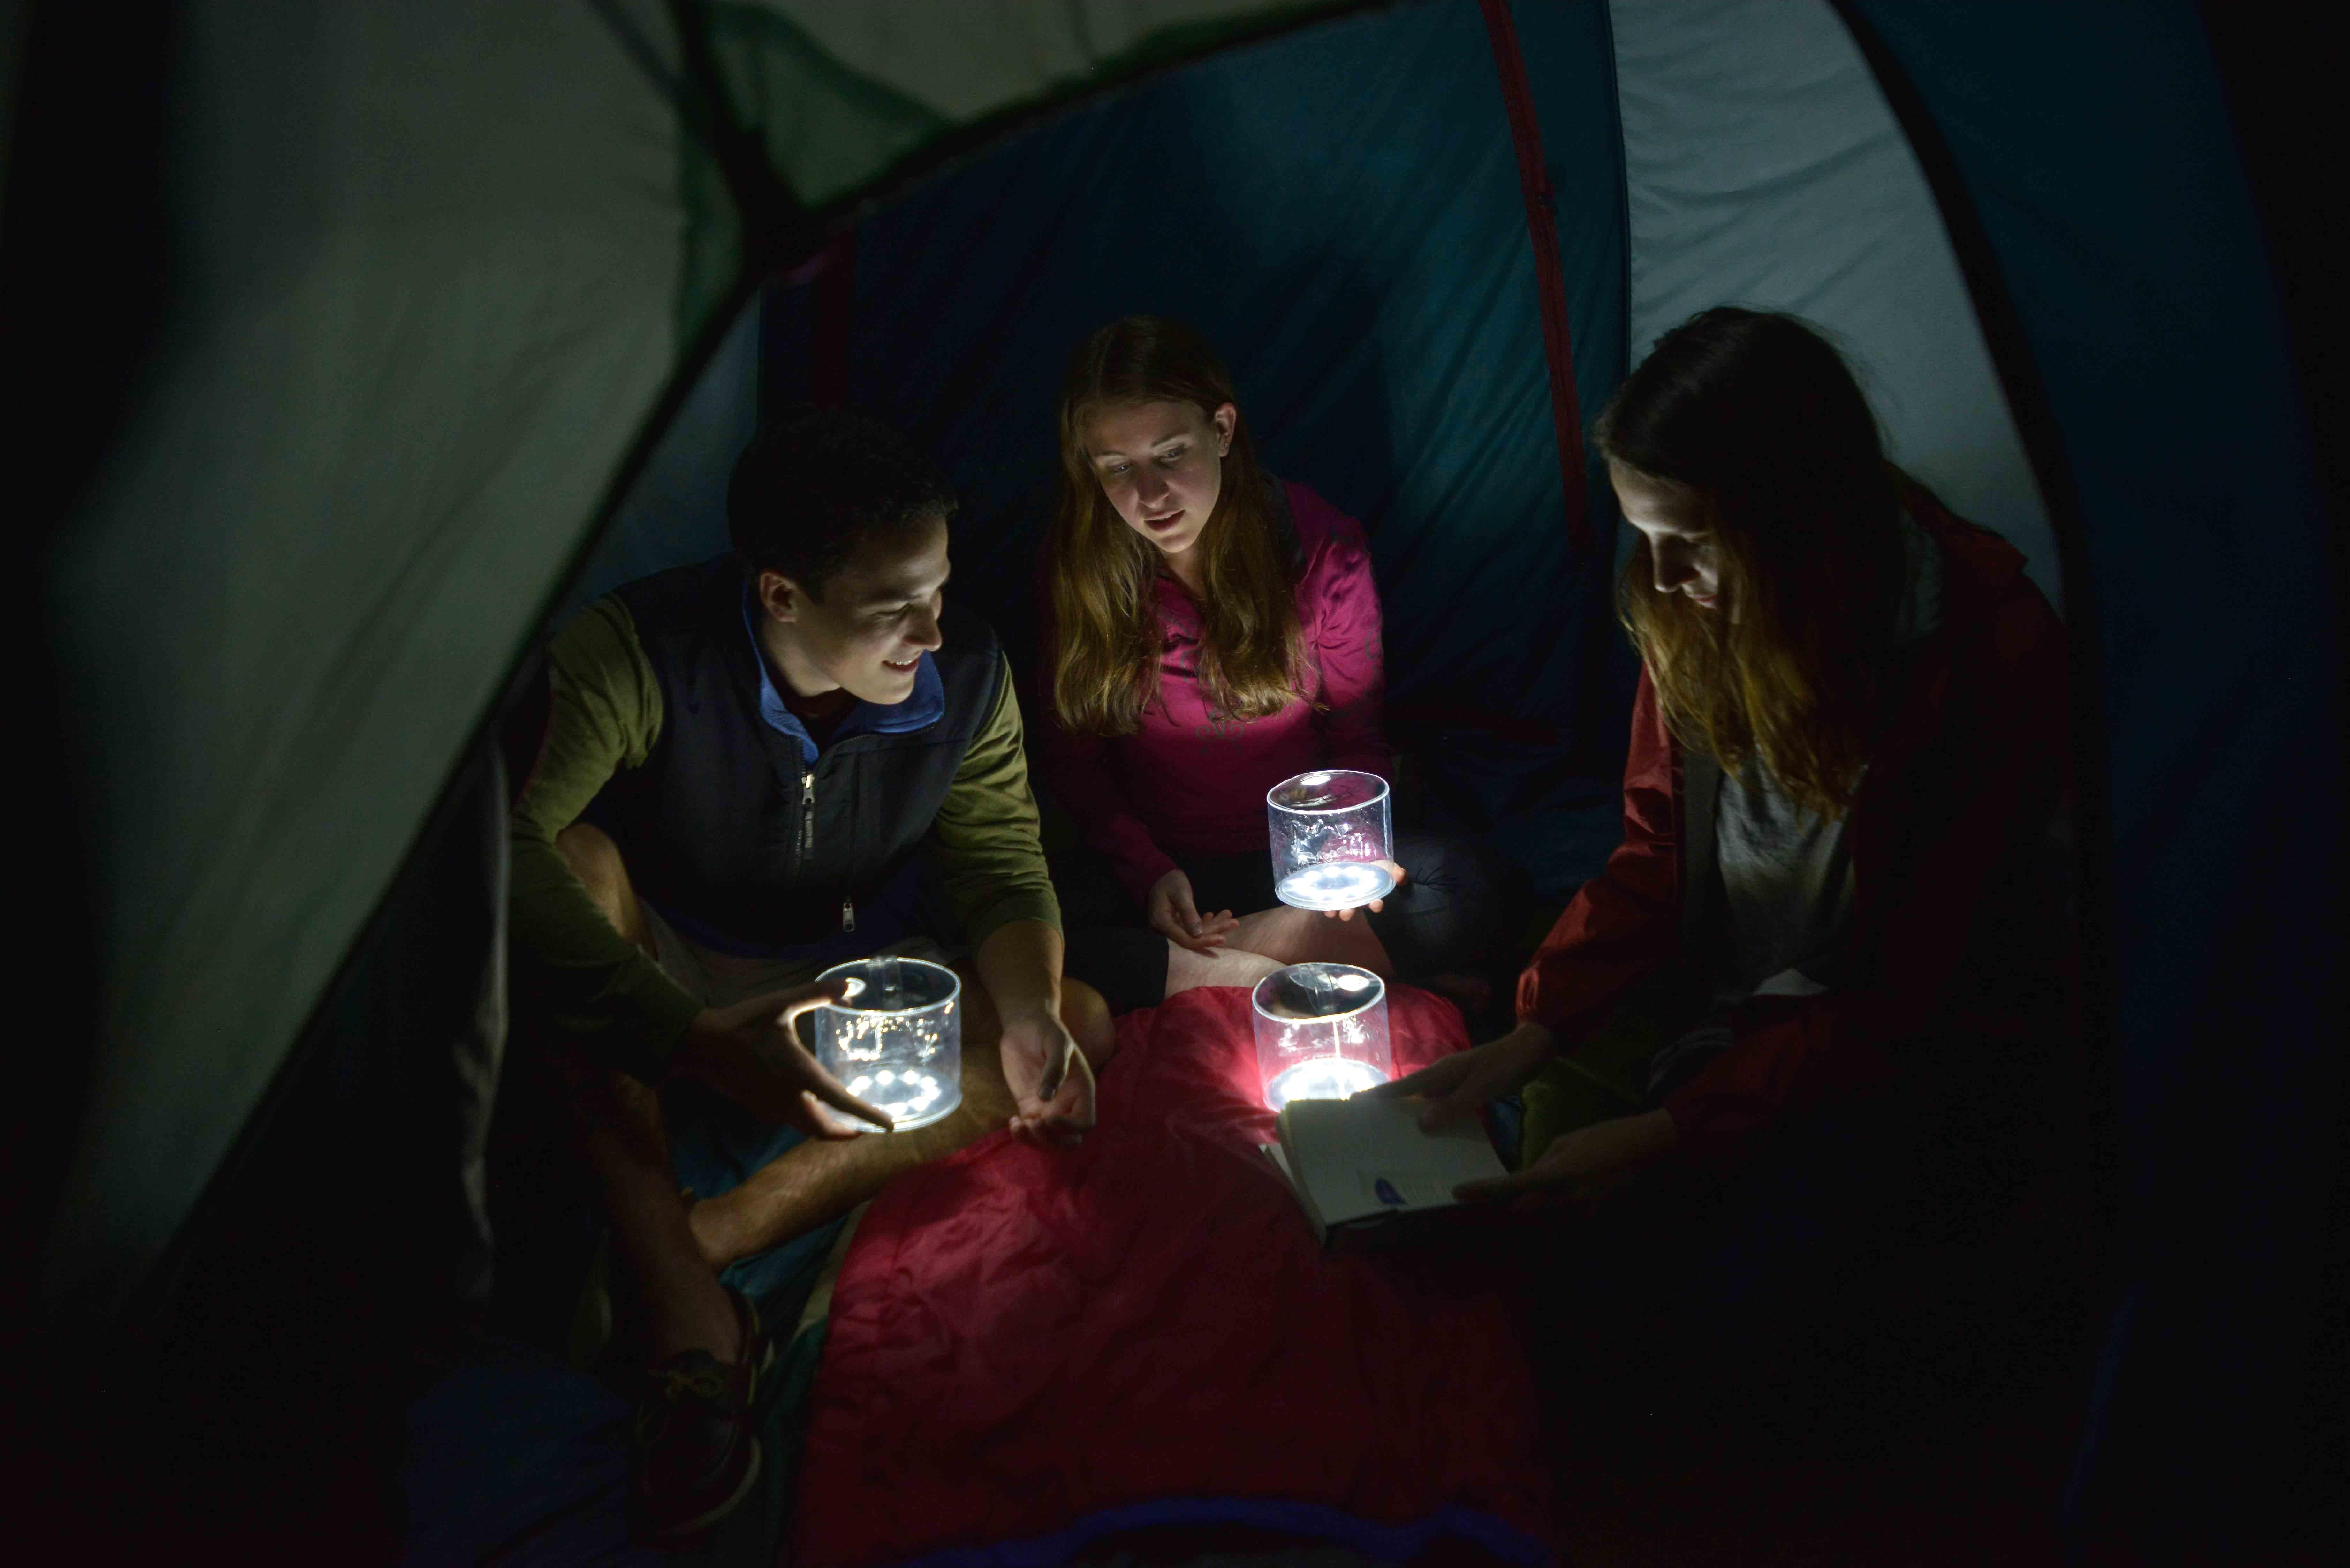 a collapsible inflatable waterproof solar lantern that weighs just 113g and is perfect for camping trips